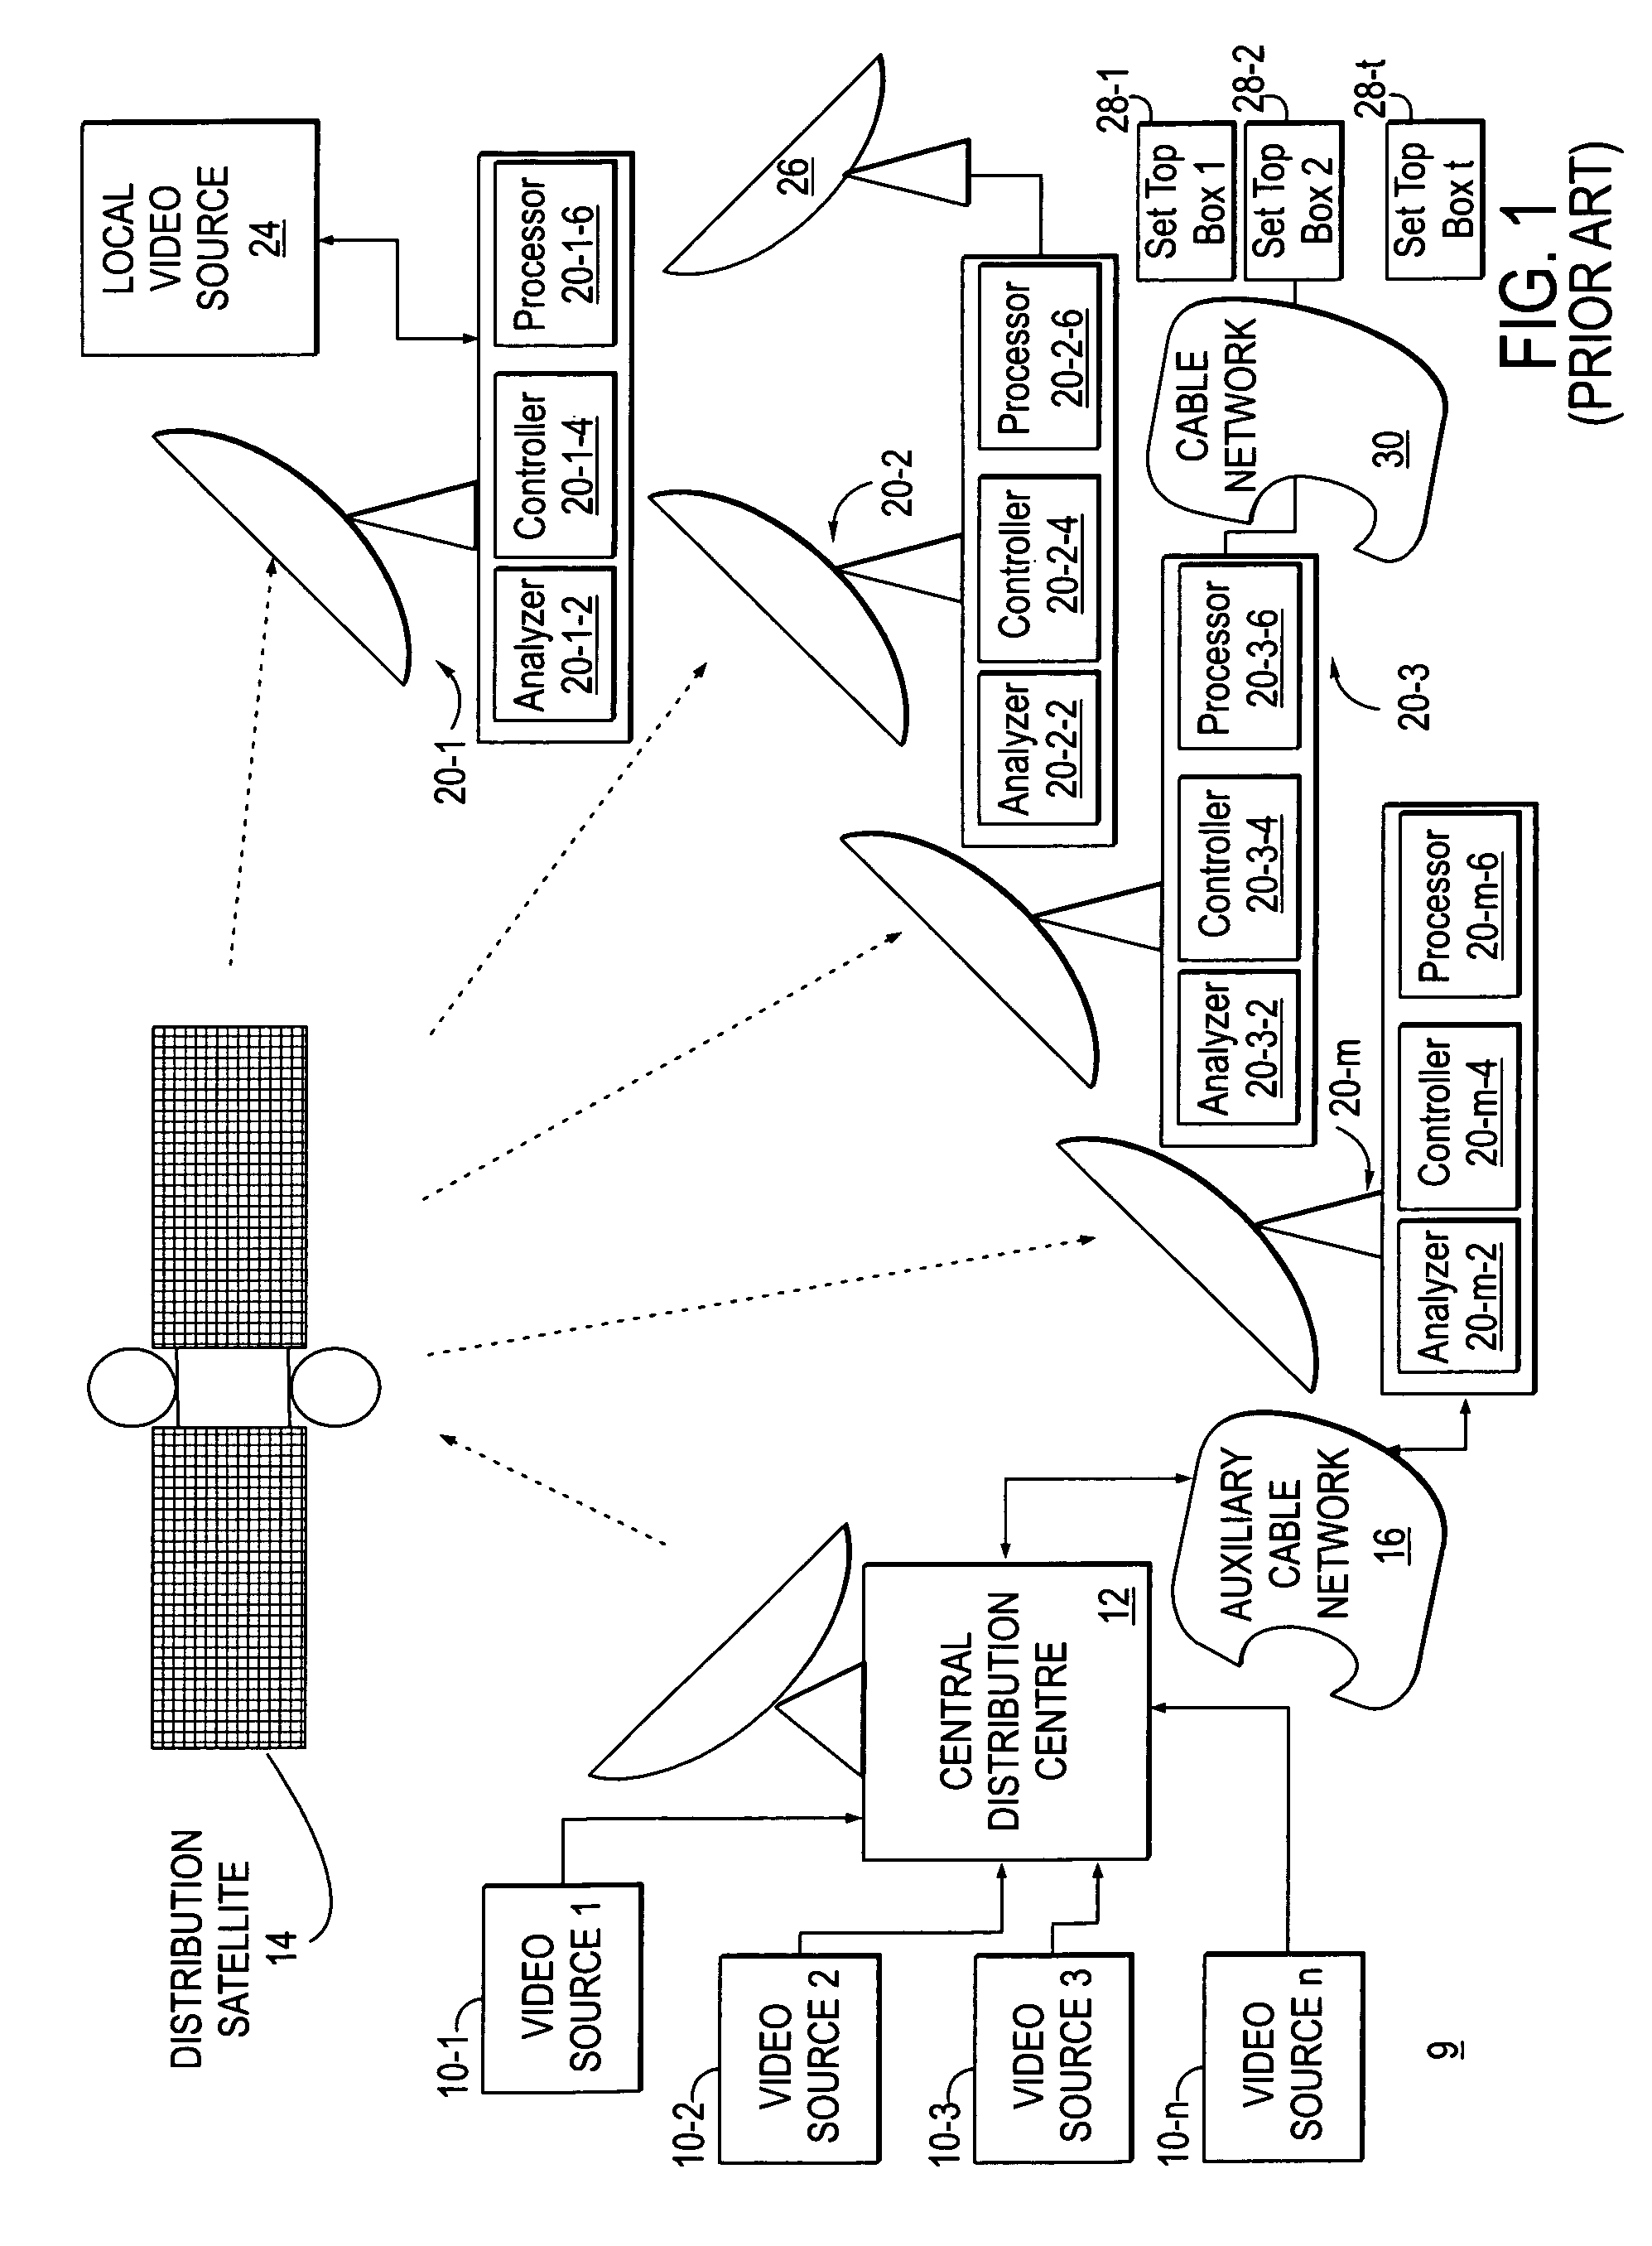 Method and system for generating, transmitting and utilizing bit rate conversion information